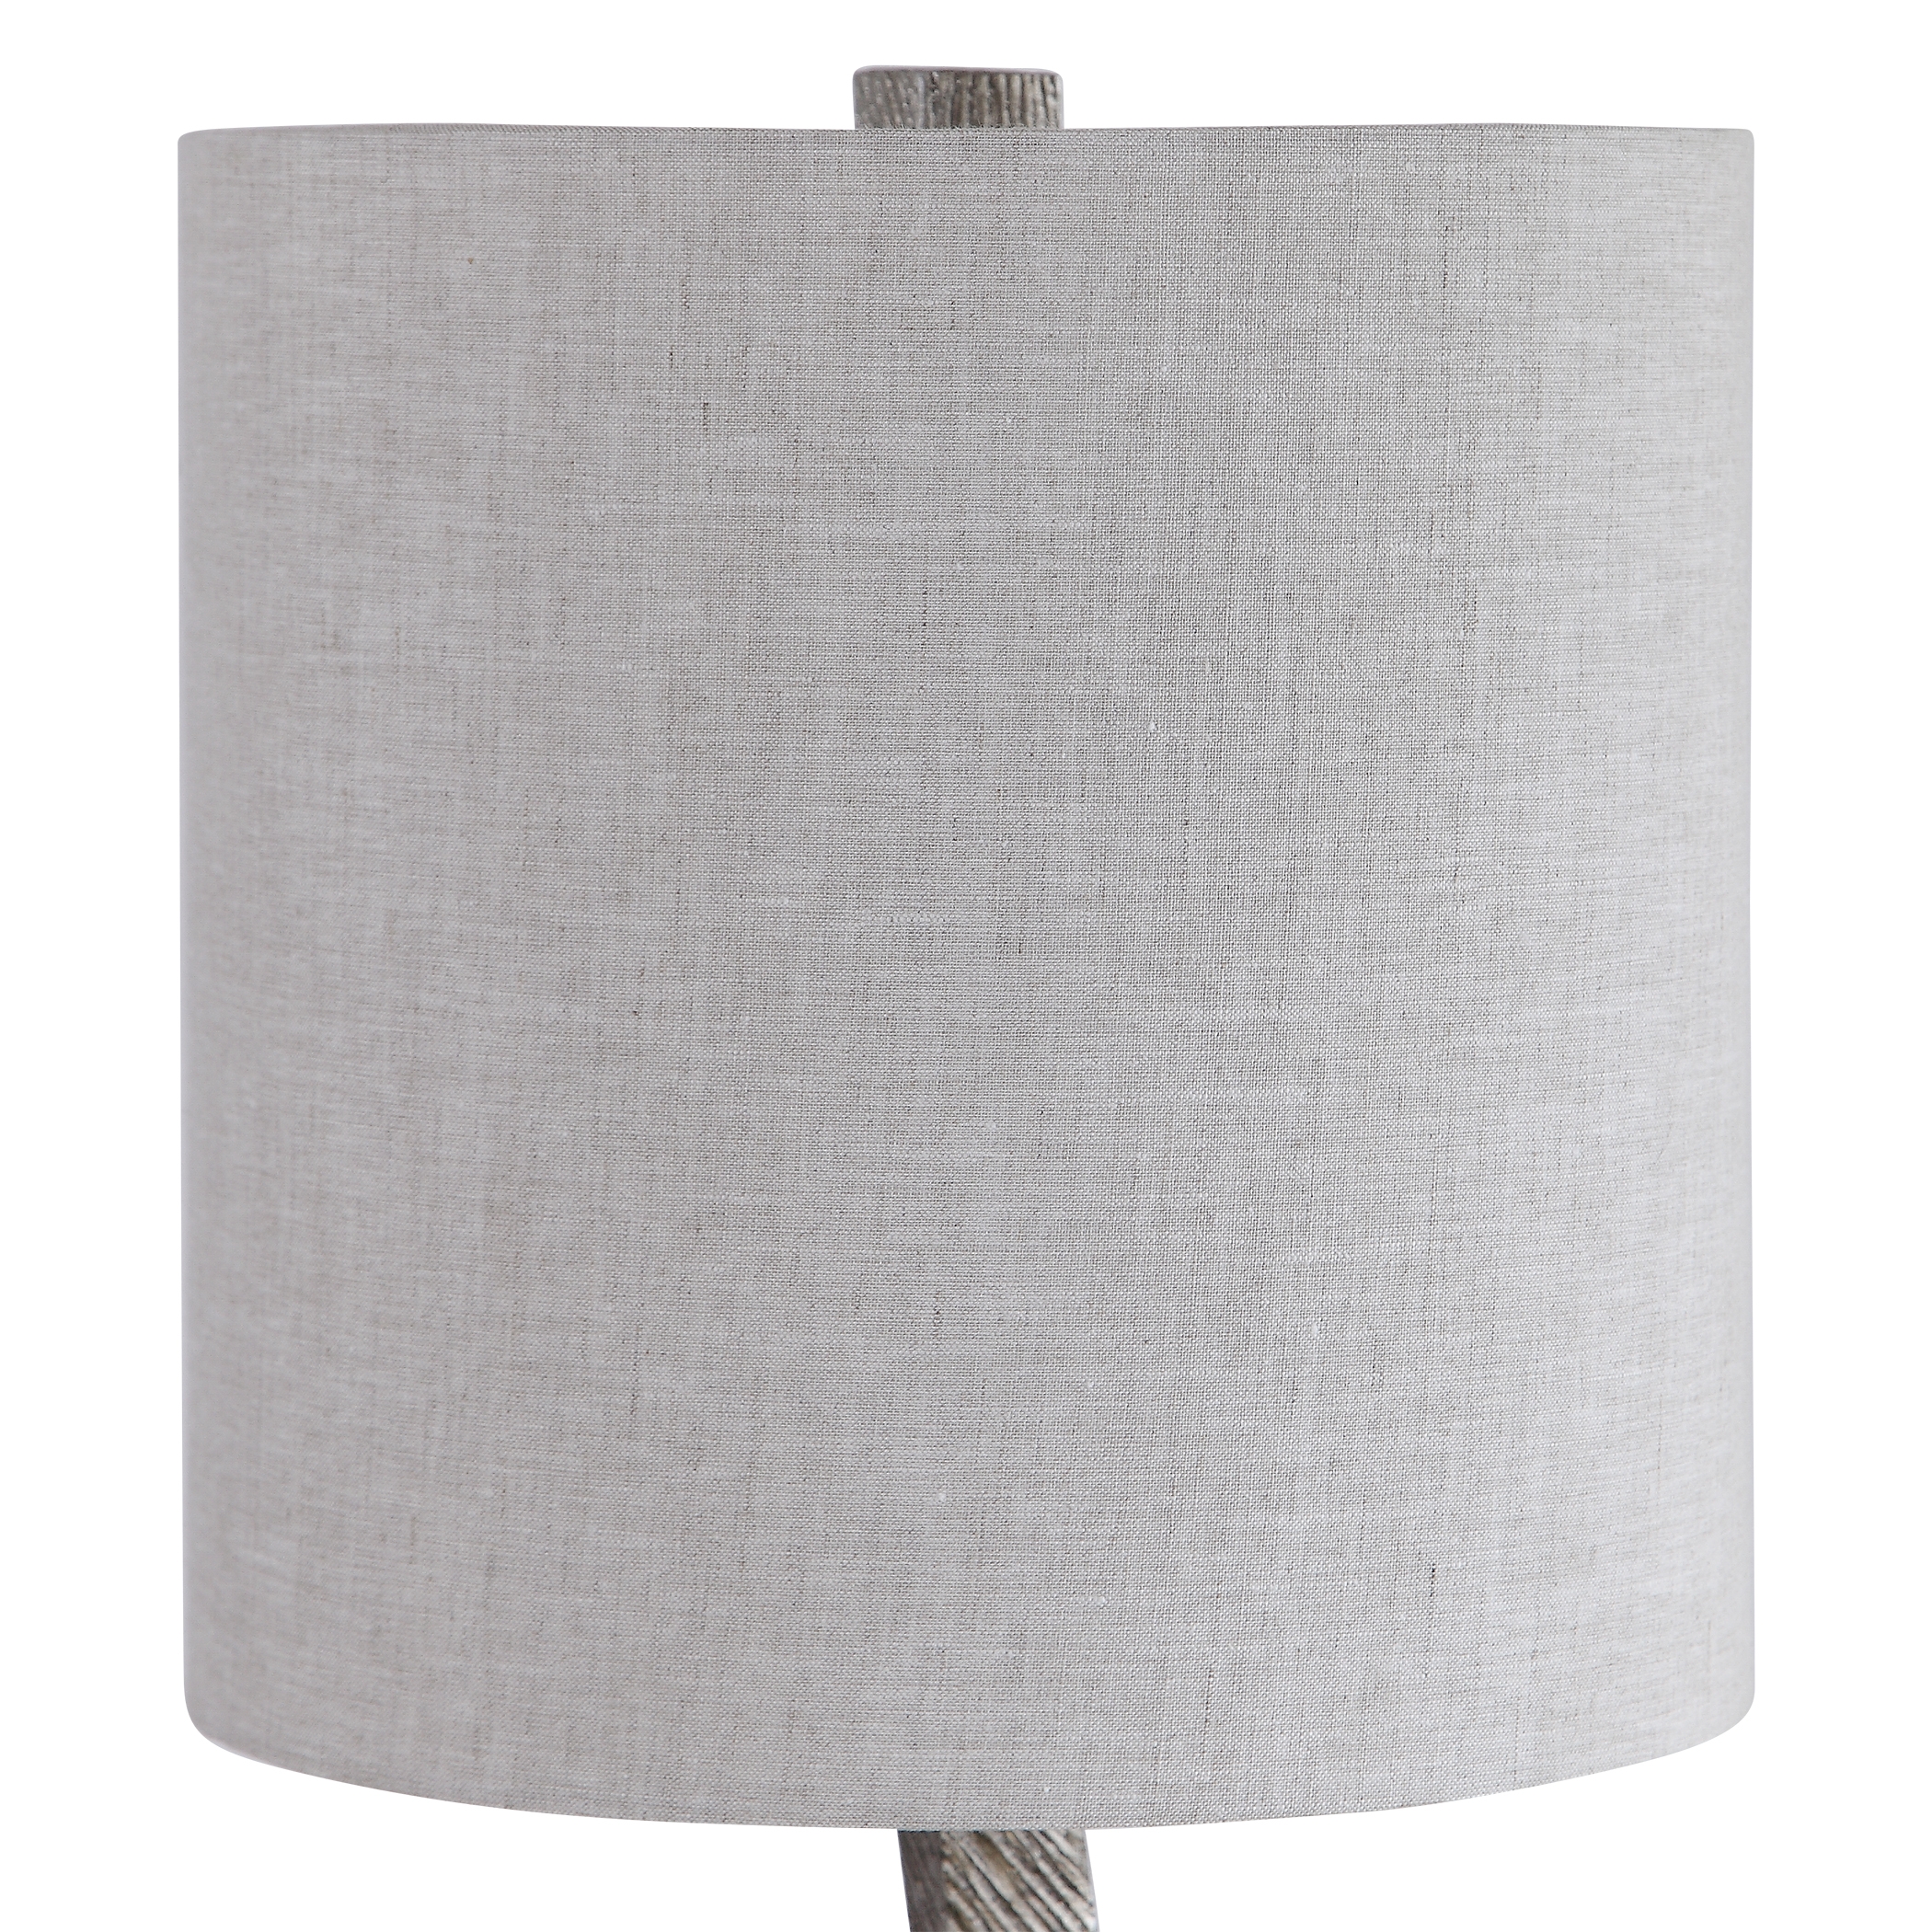 Iver Branch Accent Lamp - Image 4